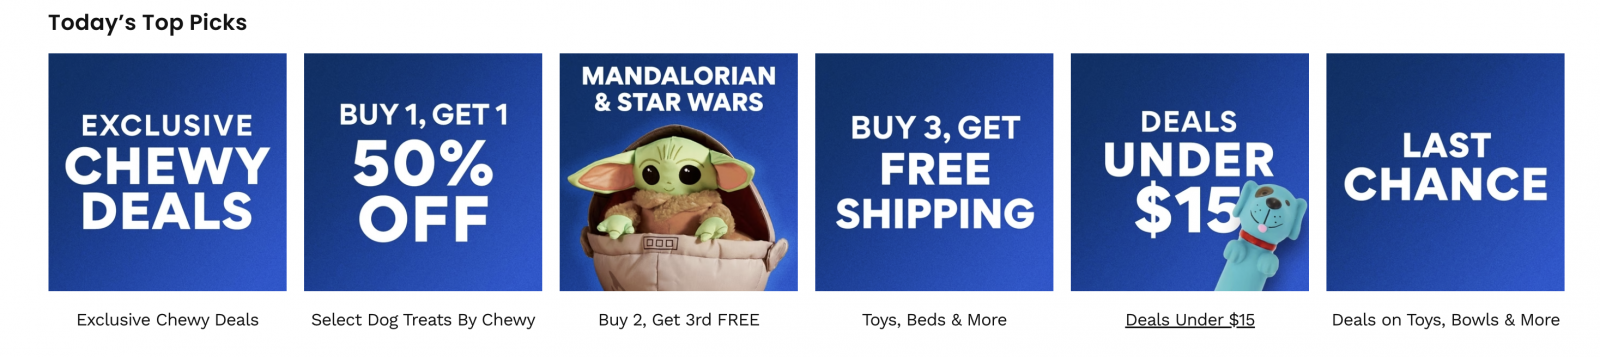 Offers at Chewy.com